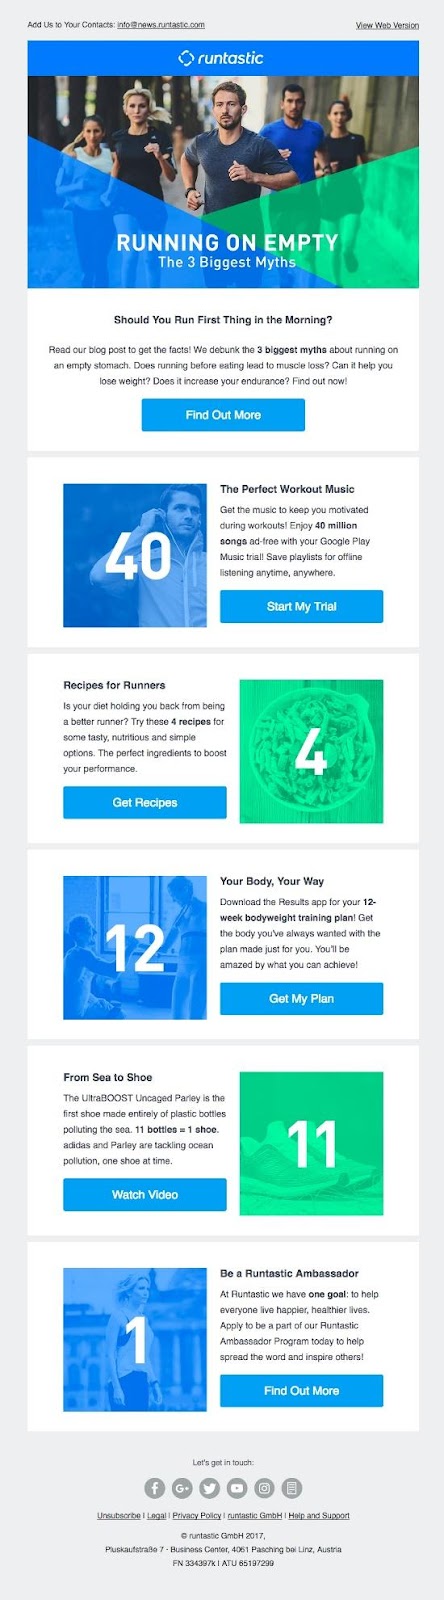 newsletter from Runtastic, a fitness app designed for athletes: